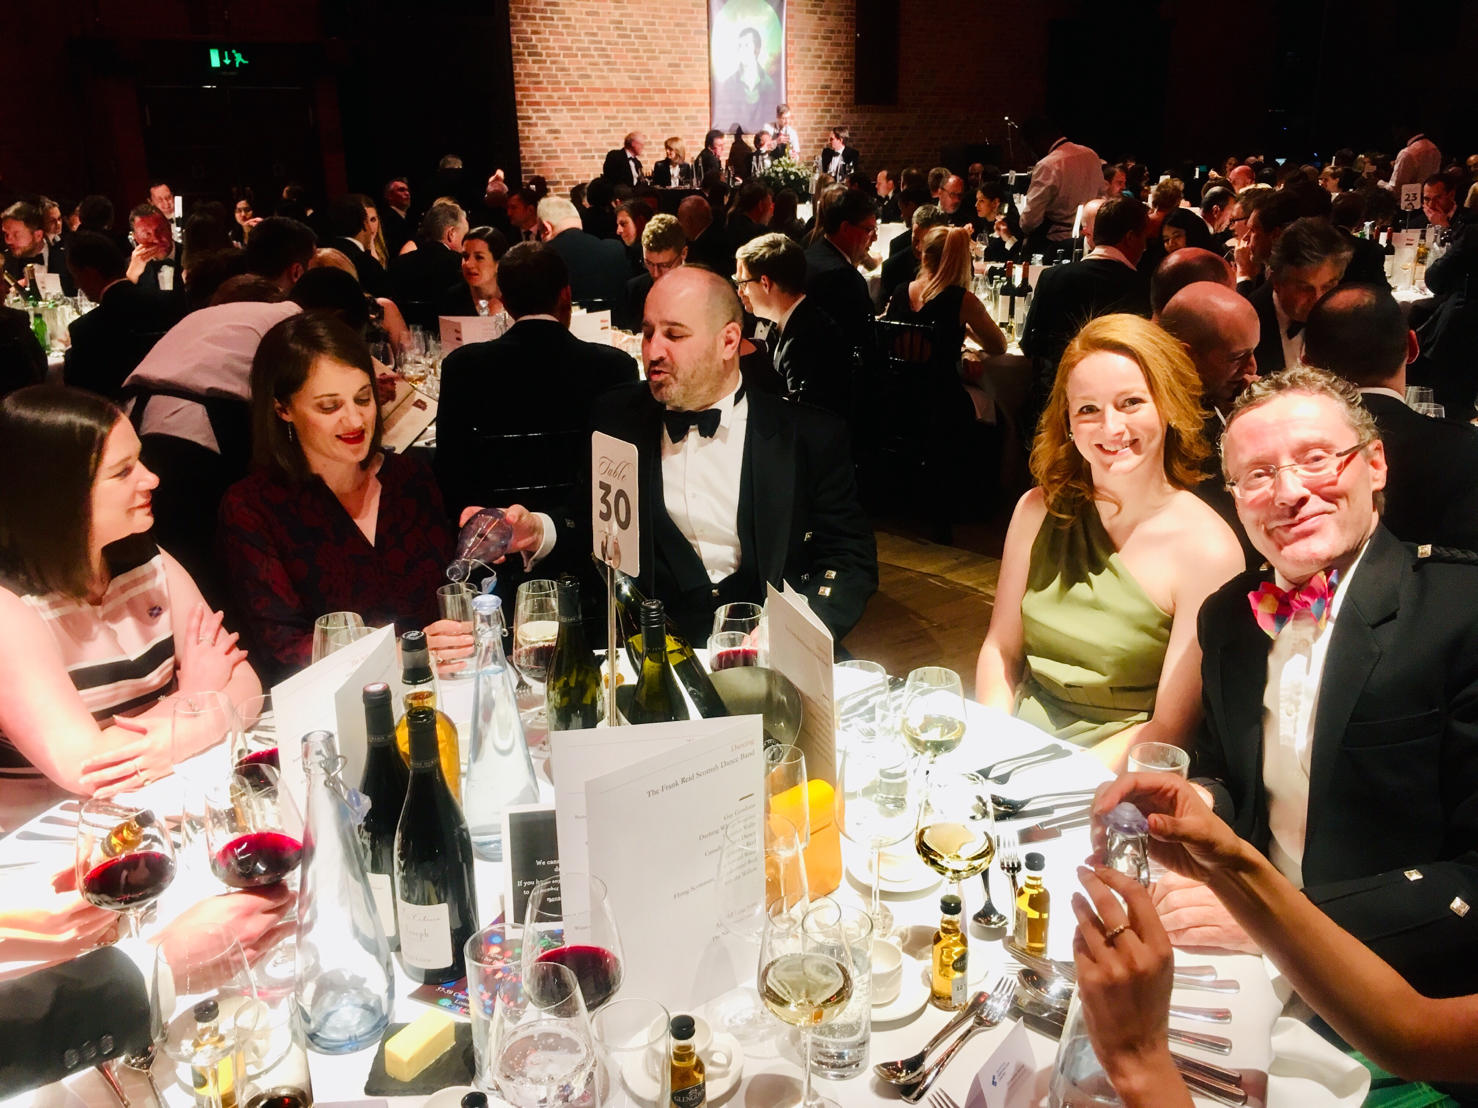 In pictures: Scots lawyers in London enjoy fantastic Burns Supper